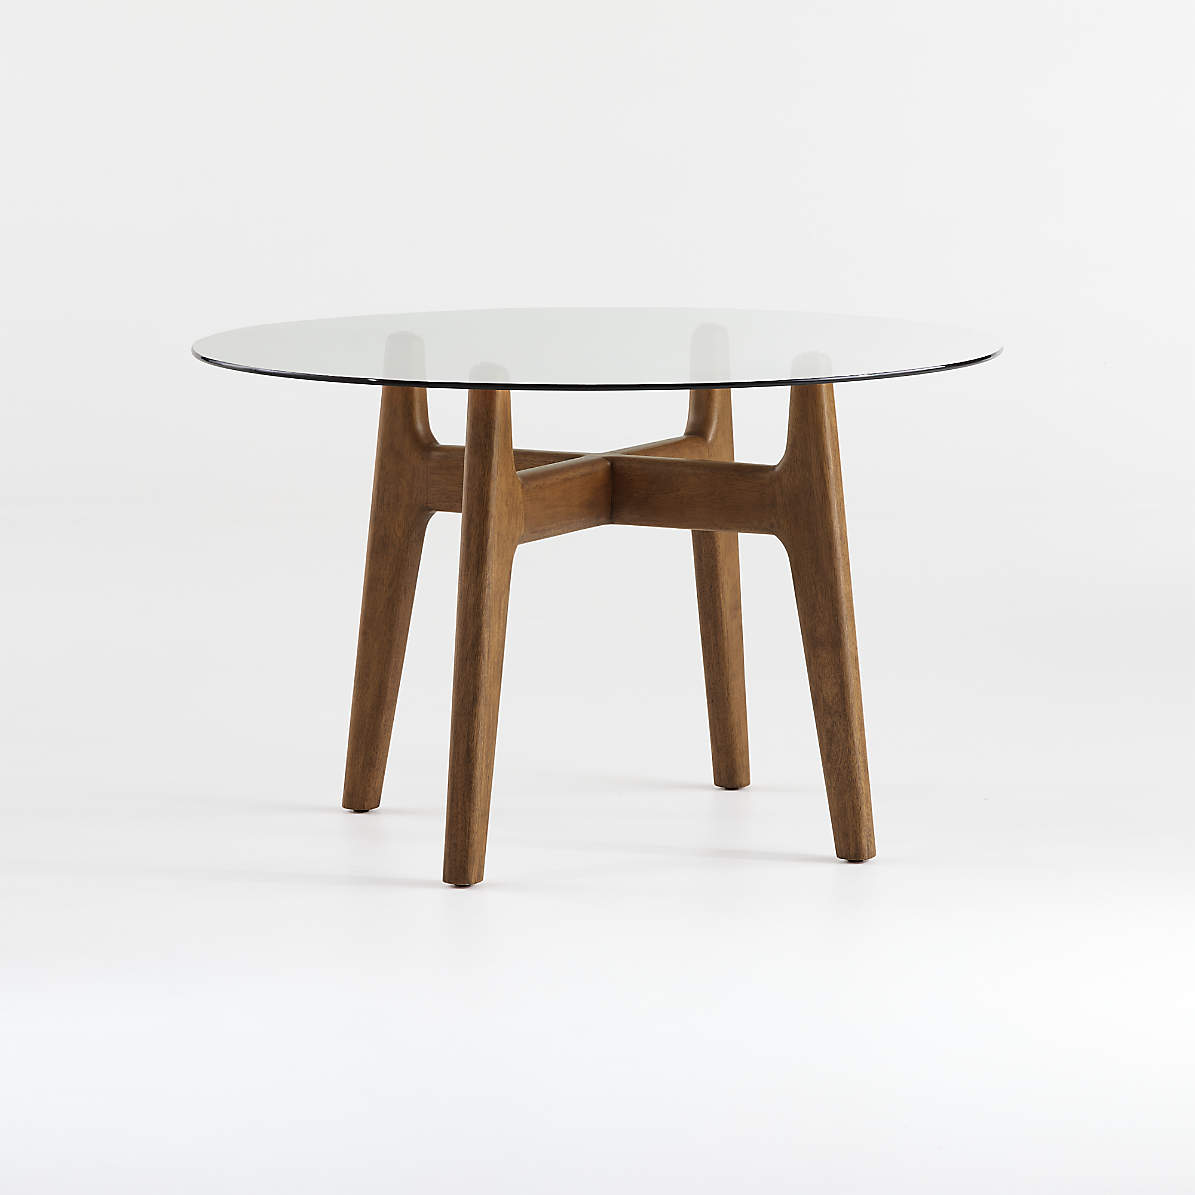 Tate 48 Round Dining Table With Glass, Round Wooden Dining Table With Glass Top